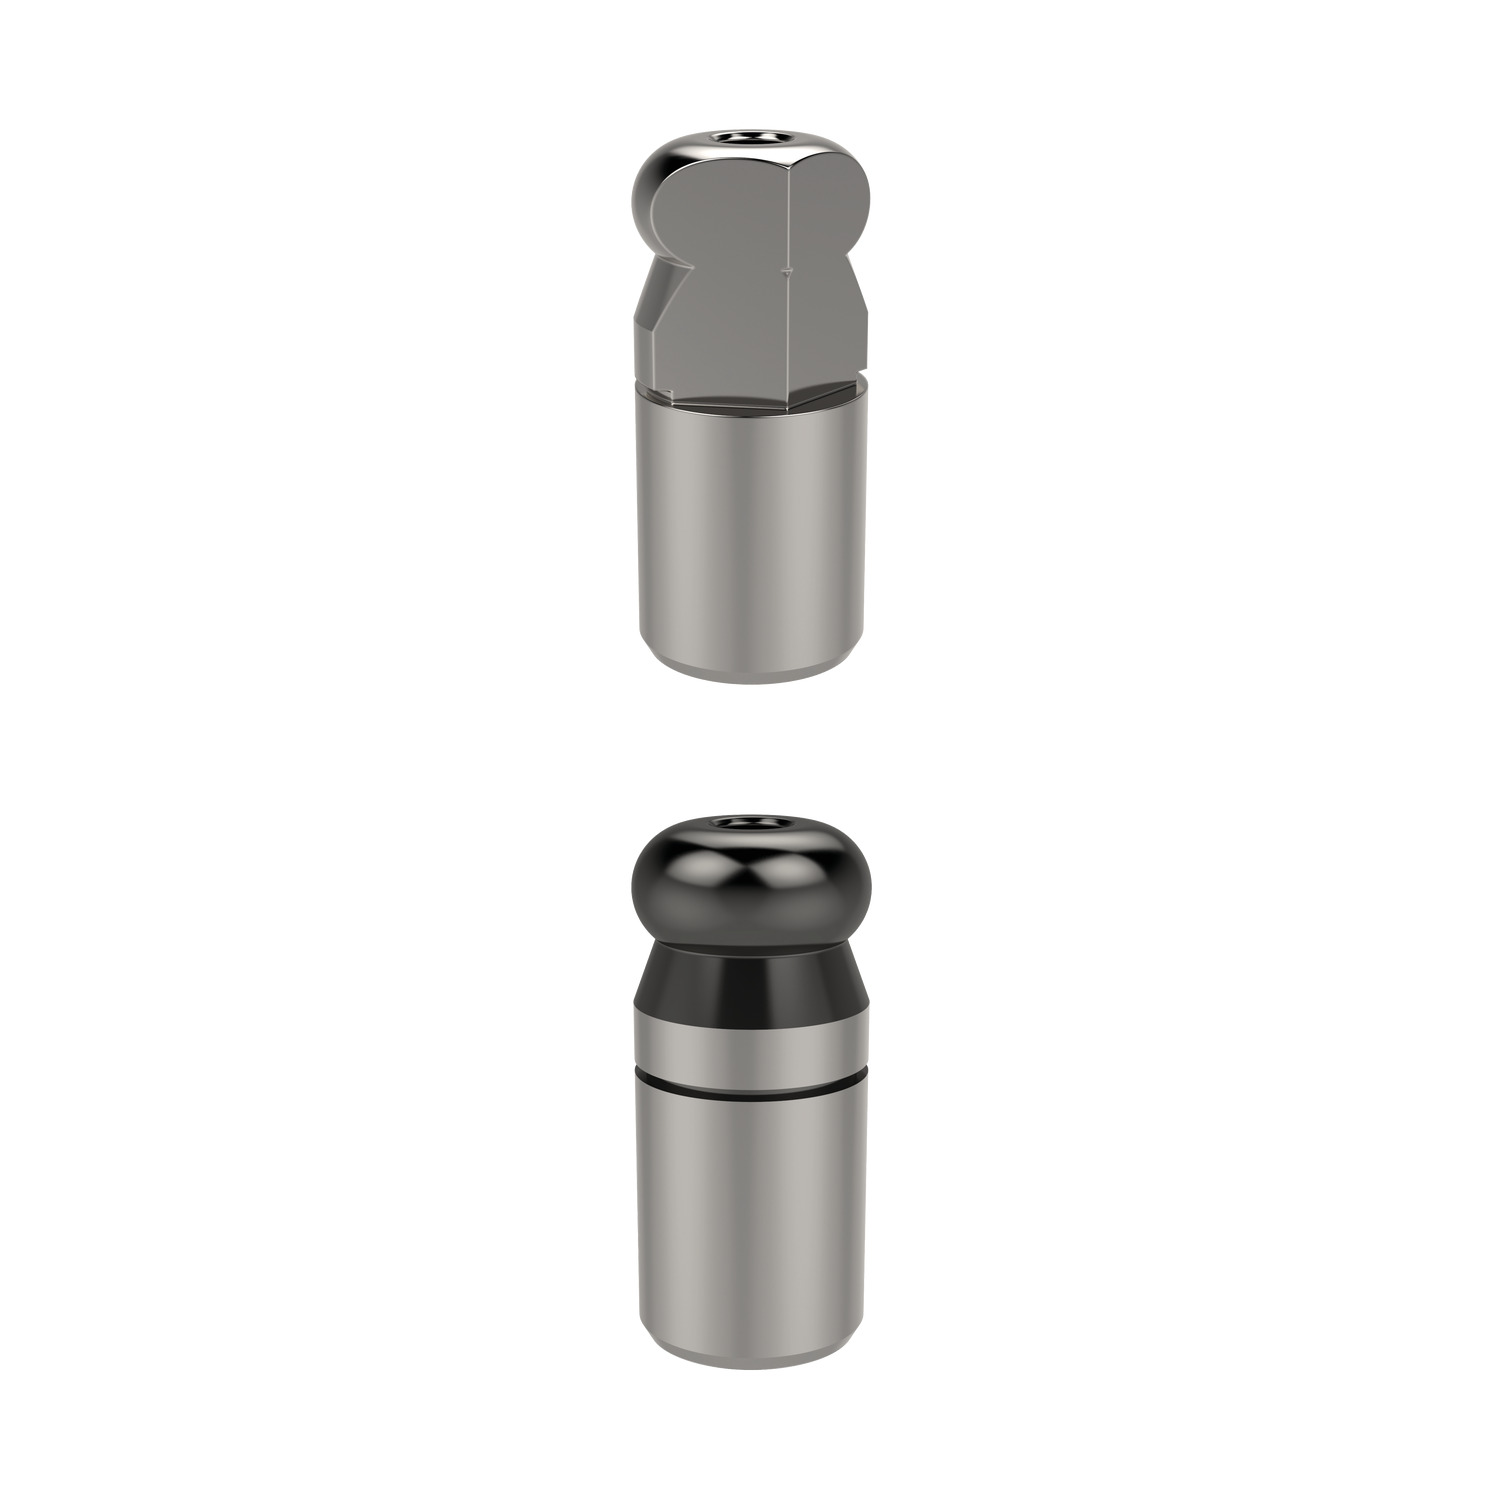 Location Pins - Non-Stepped The non-stepped version of range 36340 provide a dowel like cylindrical body with a relief groove coming in diameters 8mm to 50mm.